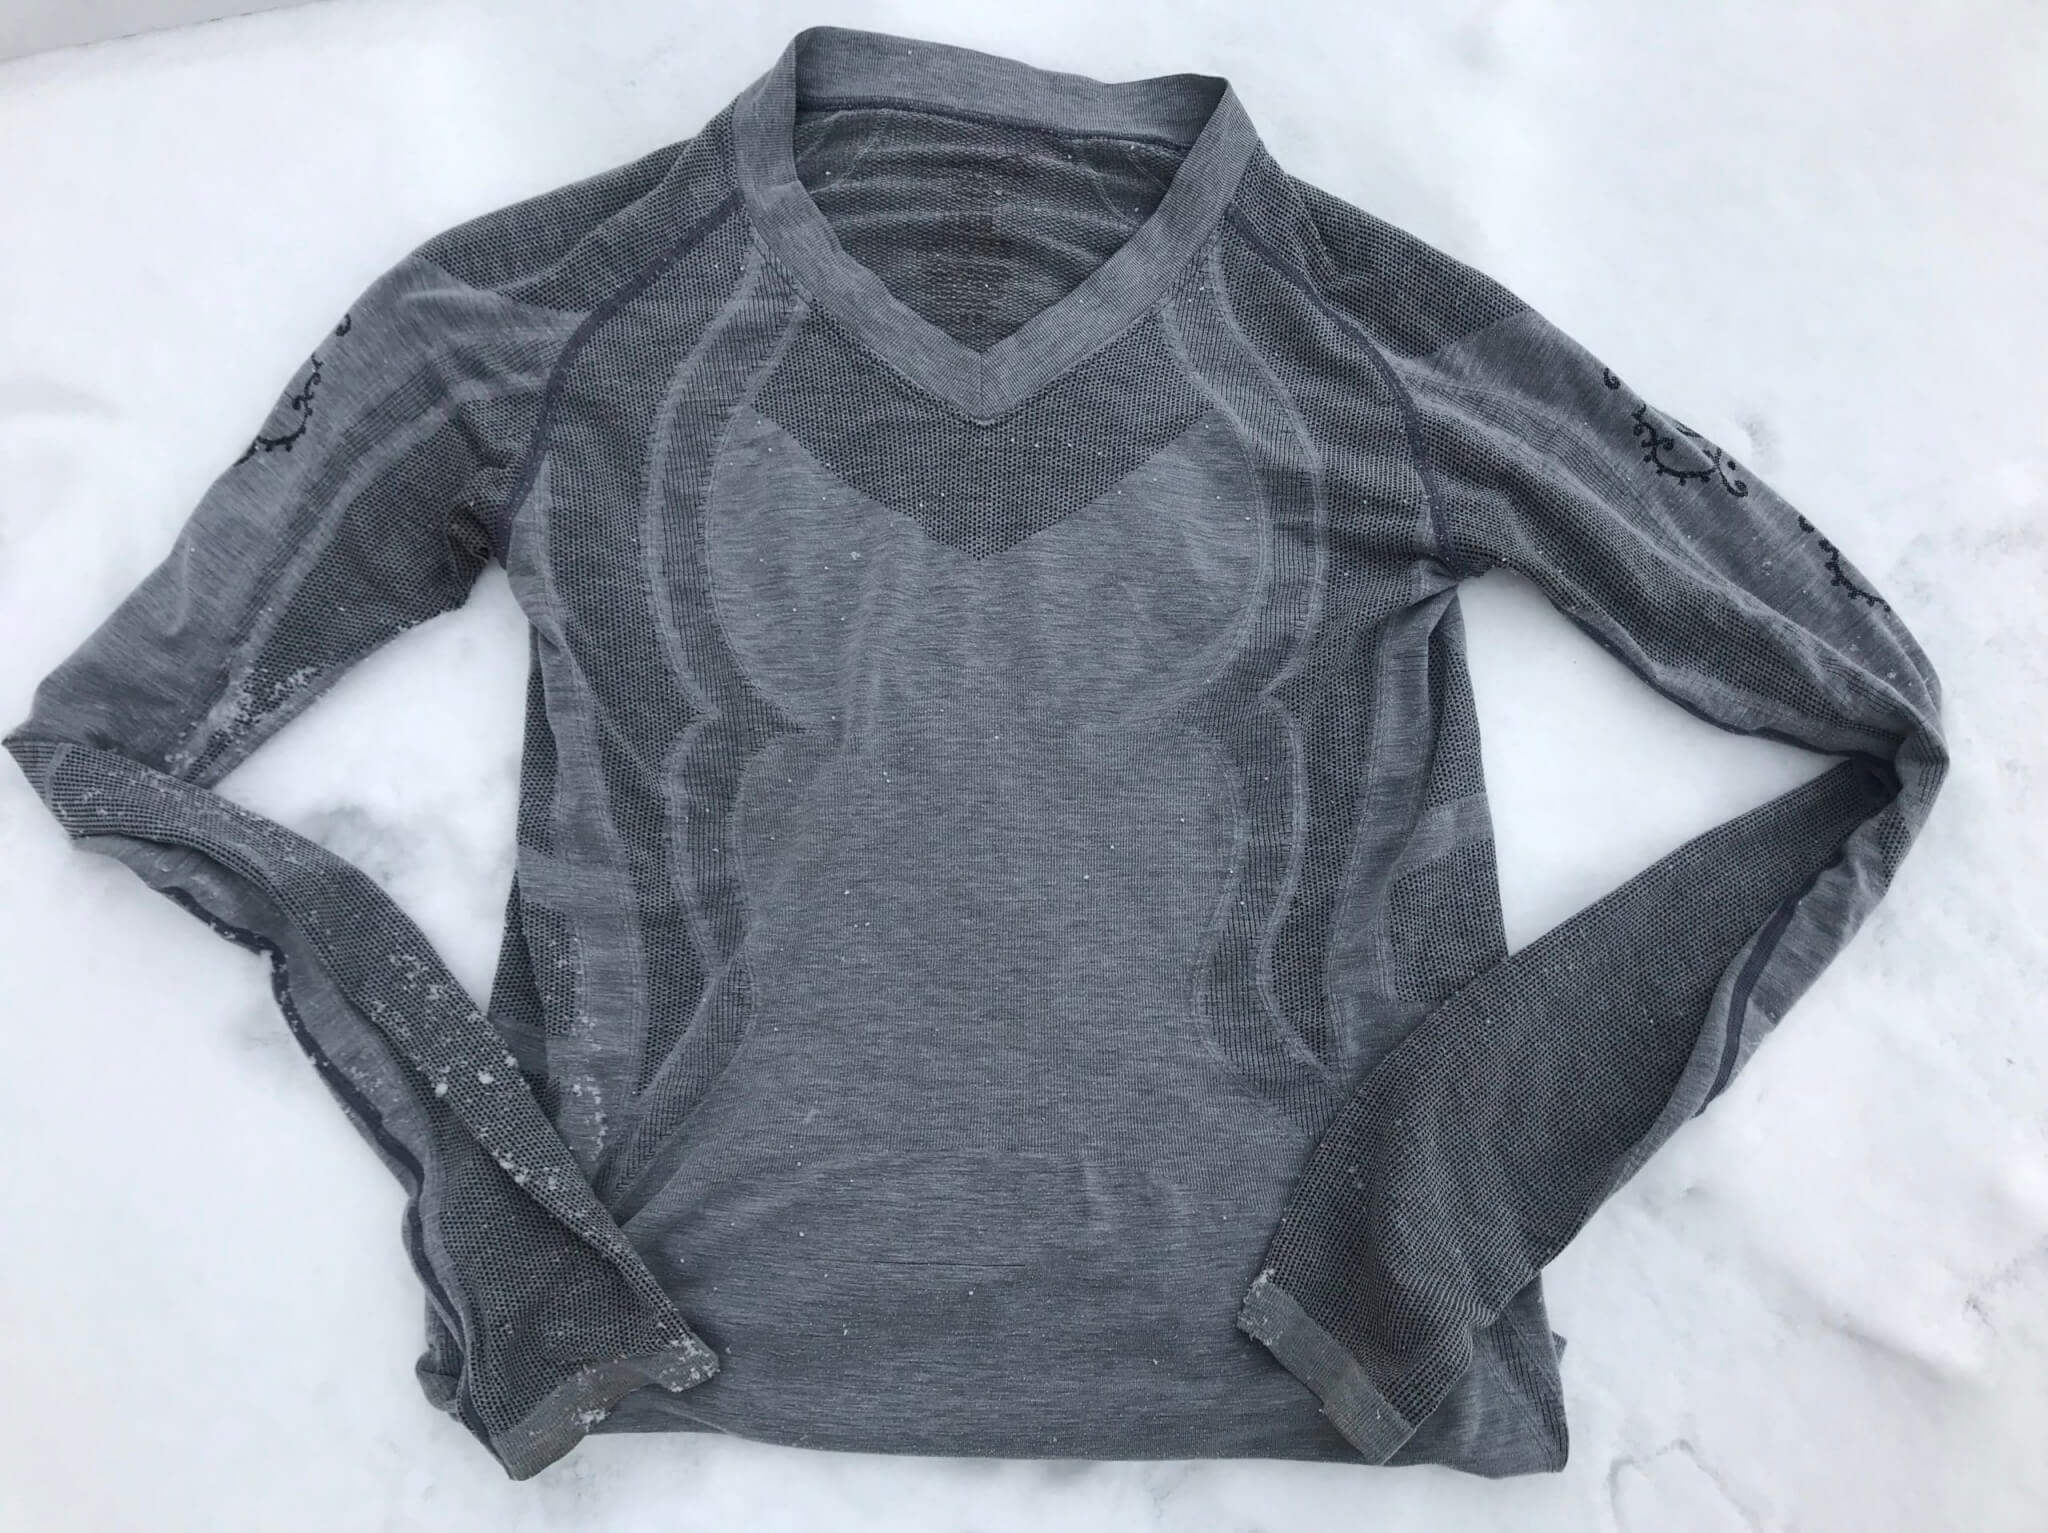 Choosing the Best Base Layers for Skiing